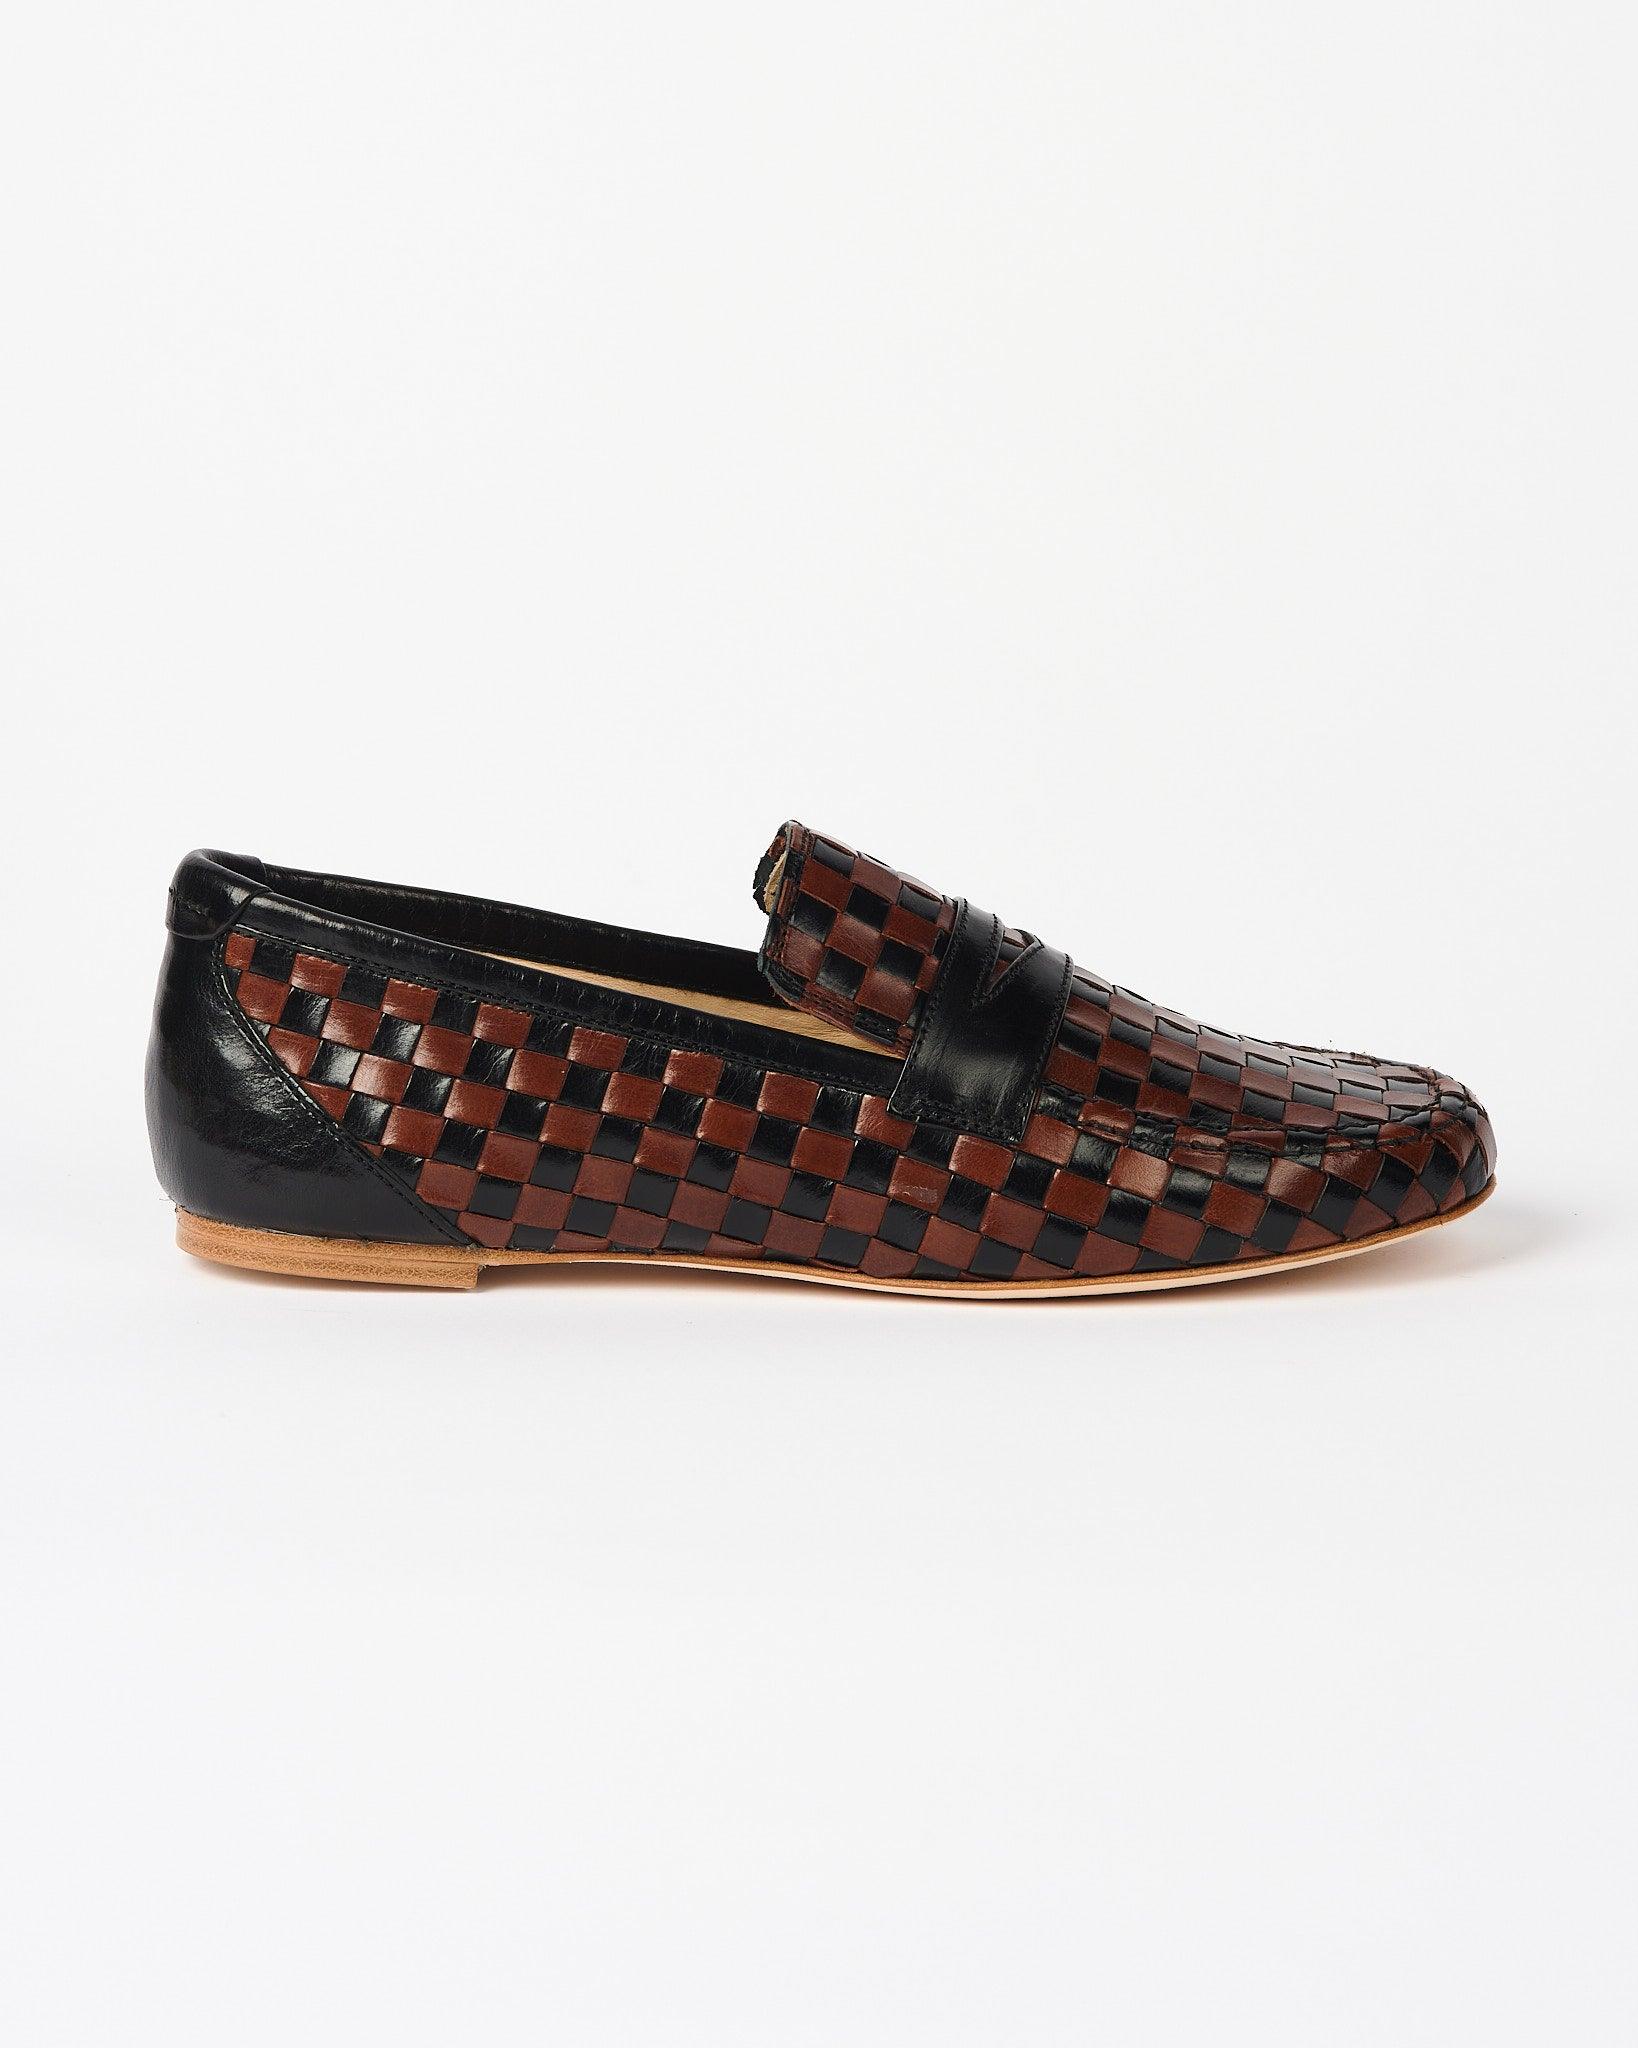 Black and Brown Woven Loafer Flat Side View